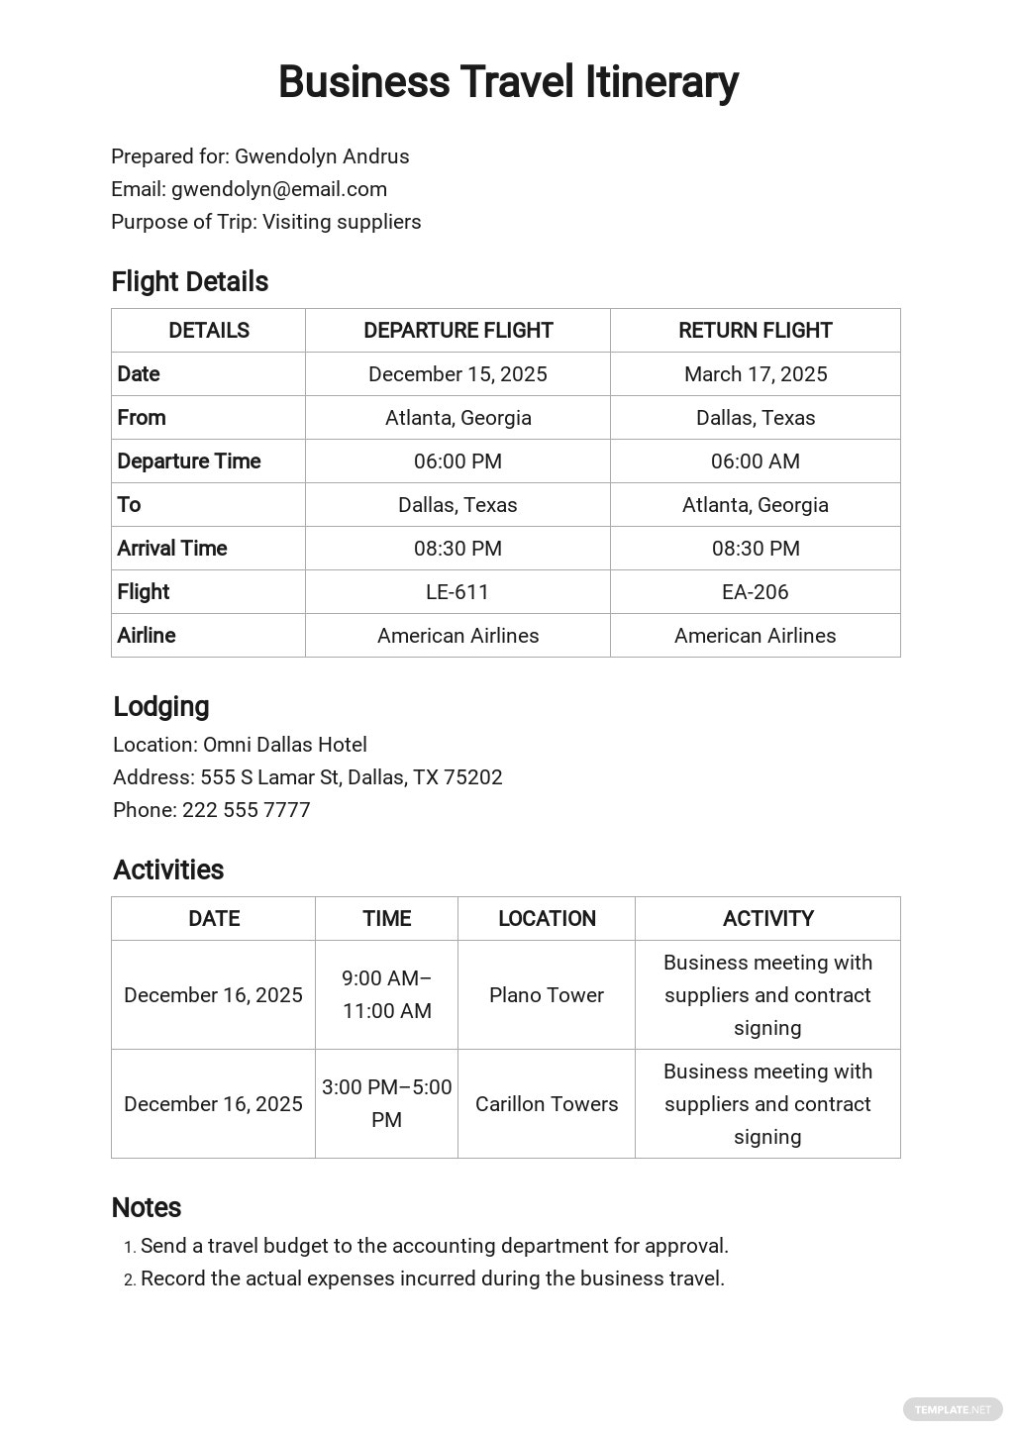 Executive Travel Itinerary Template [Free Pdf] - Google Docs, Google Within Business Travel Itinerary Template Word